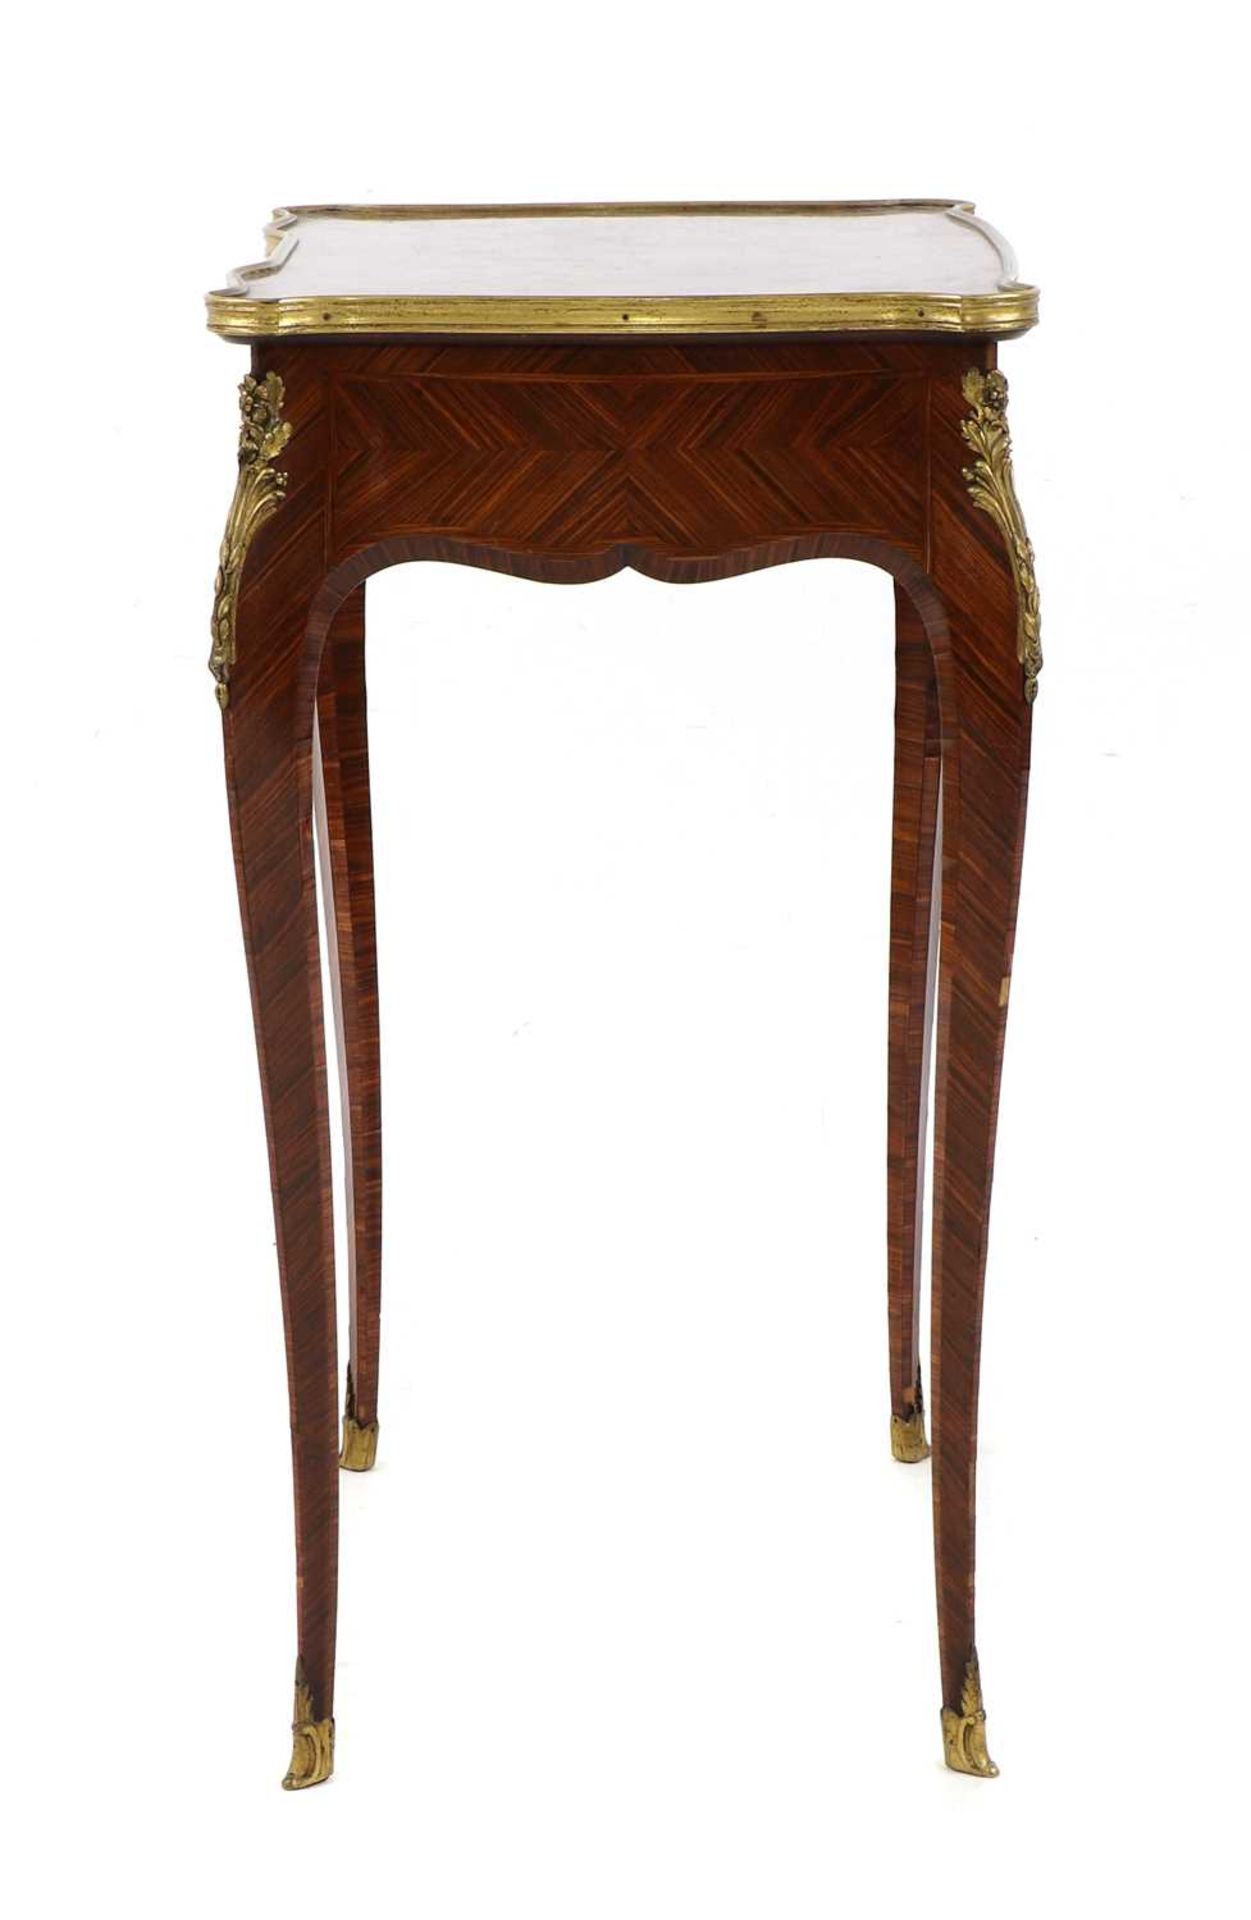 A Louis XV-style kingwood and ormolu-mounted side table, - Image 3 of 6